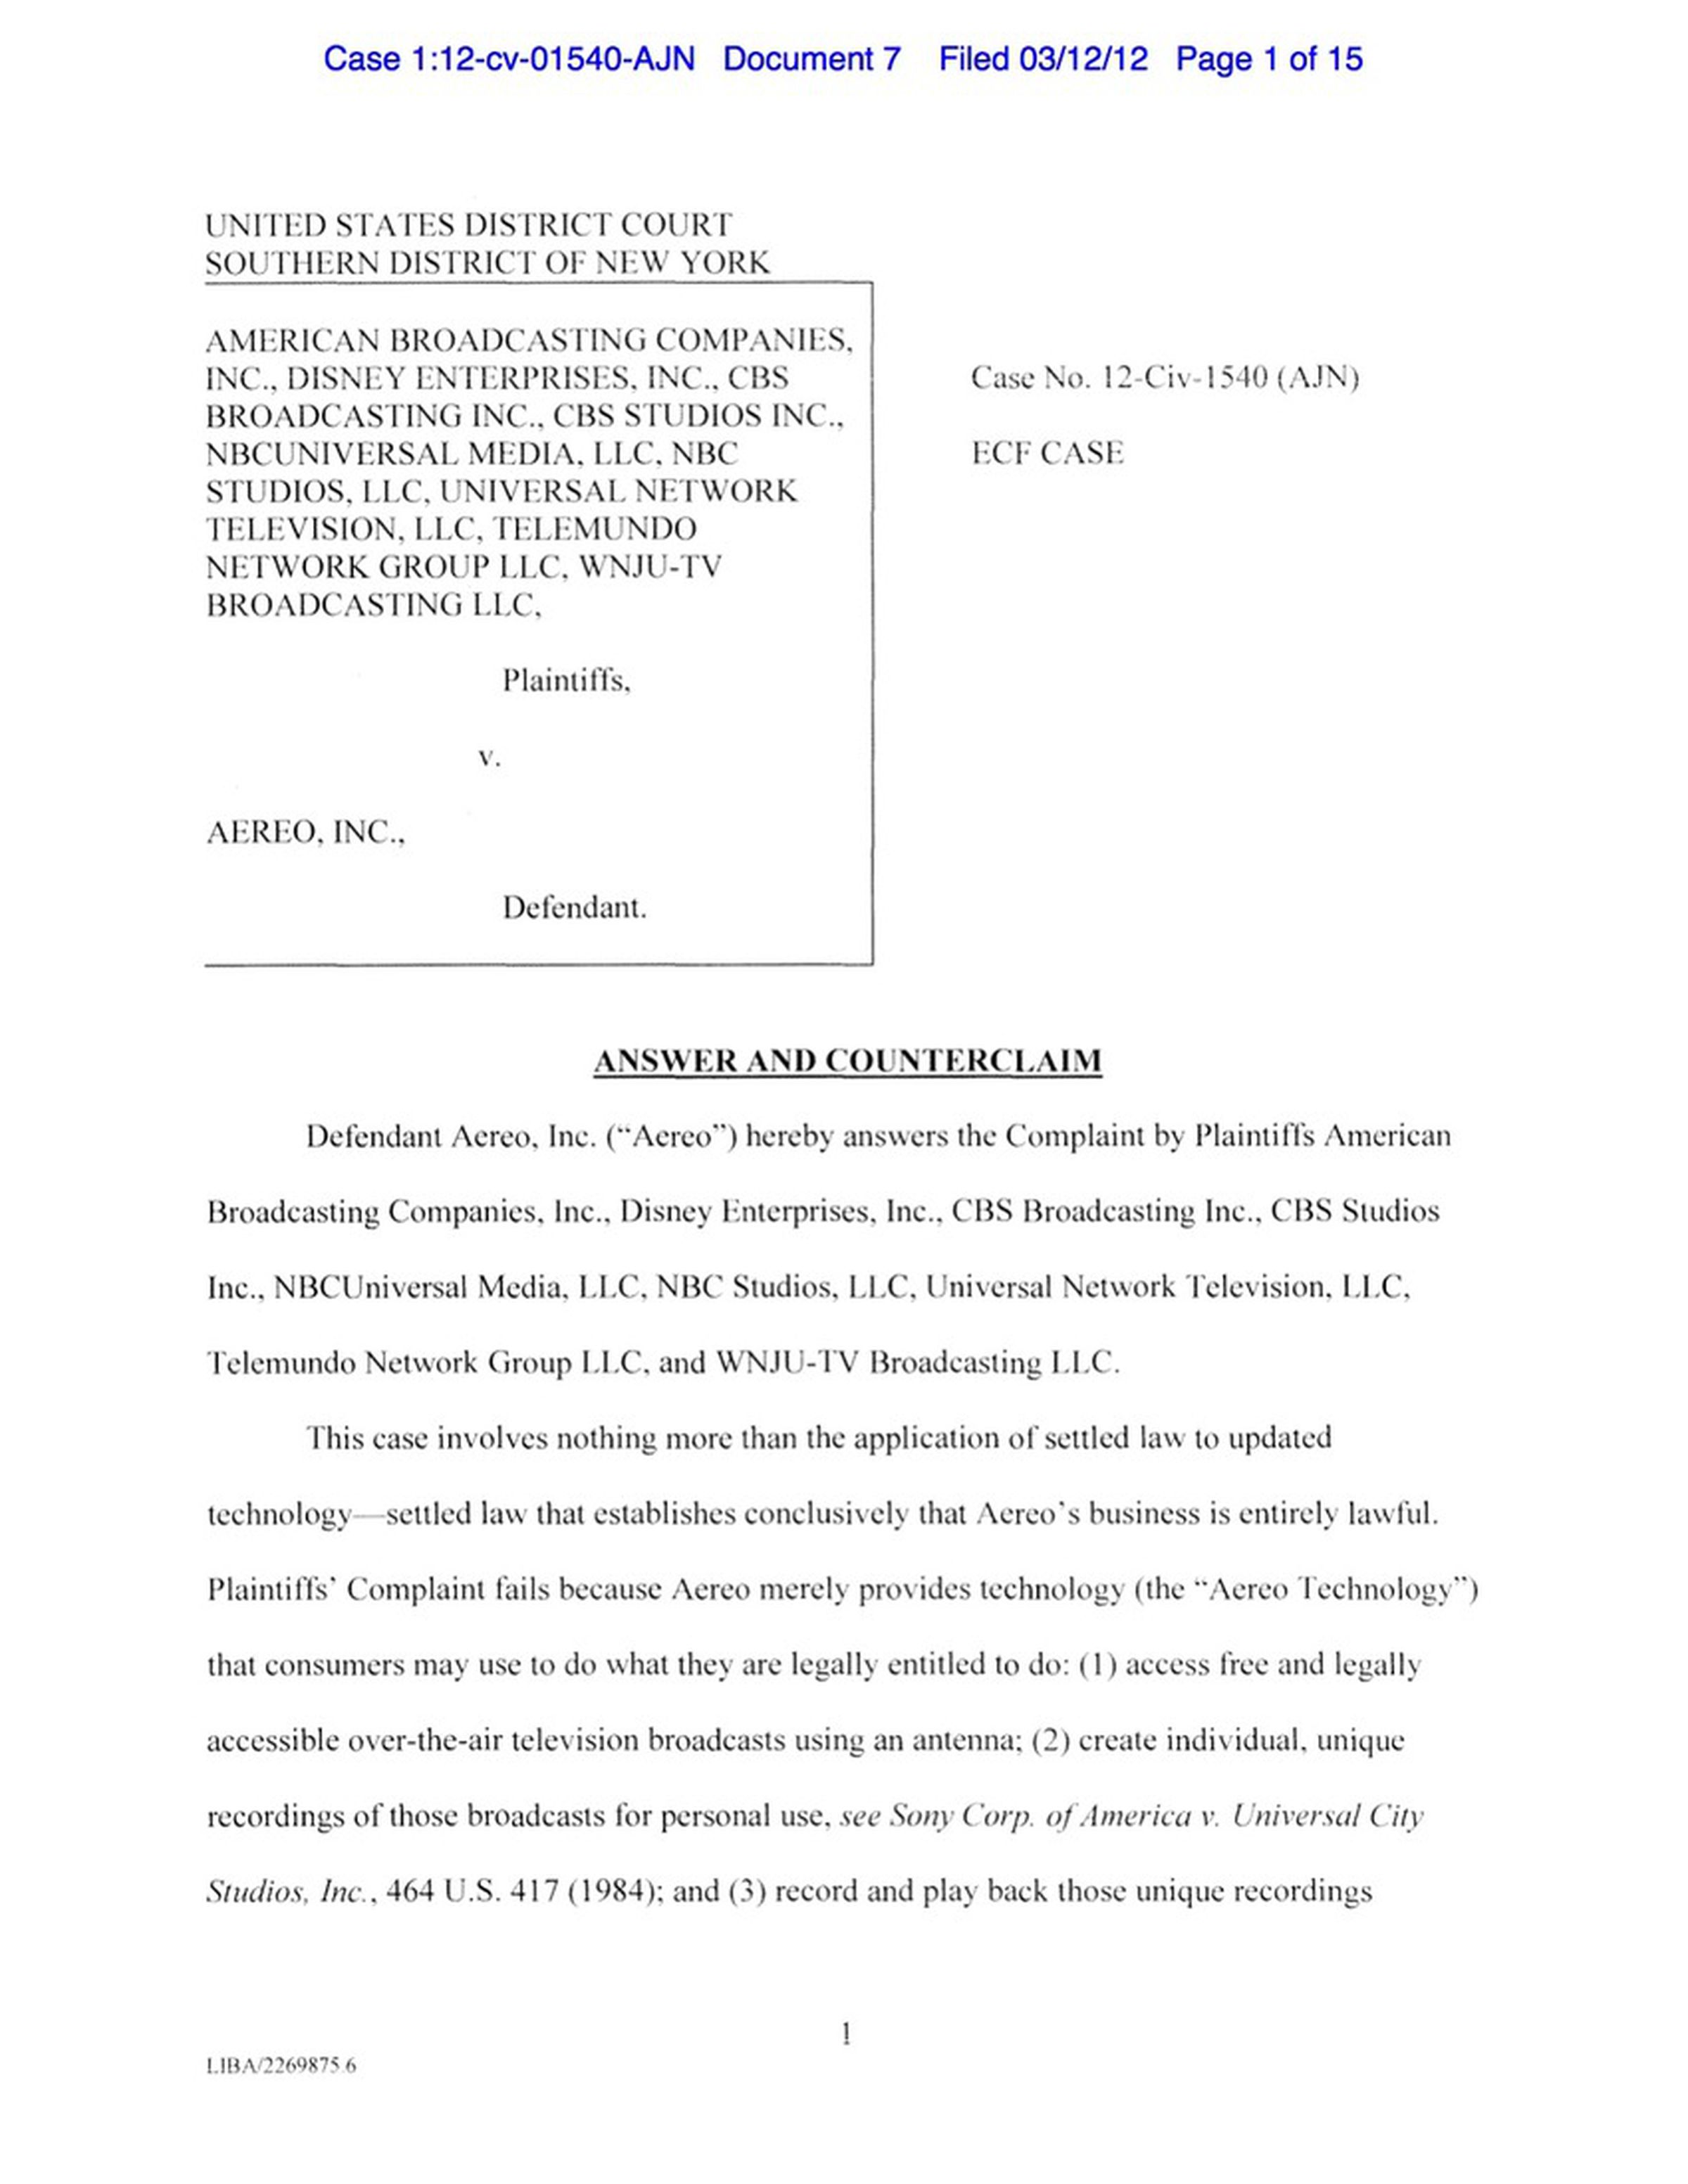 Aereo's countersuit against Disney, NBC, CBS, and others